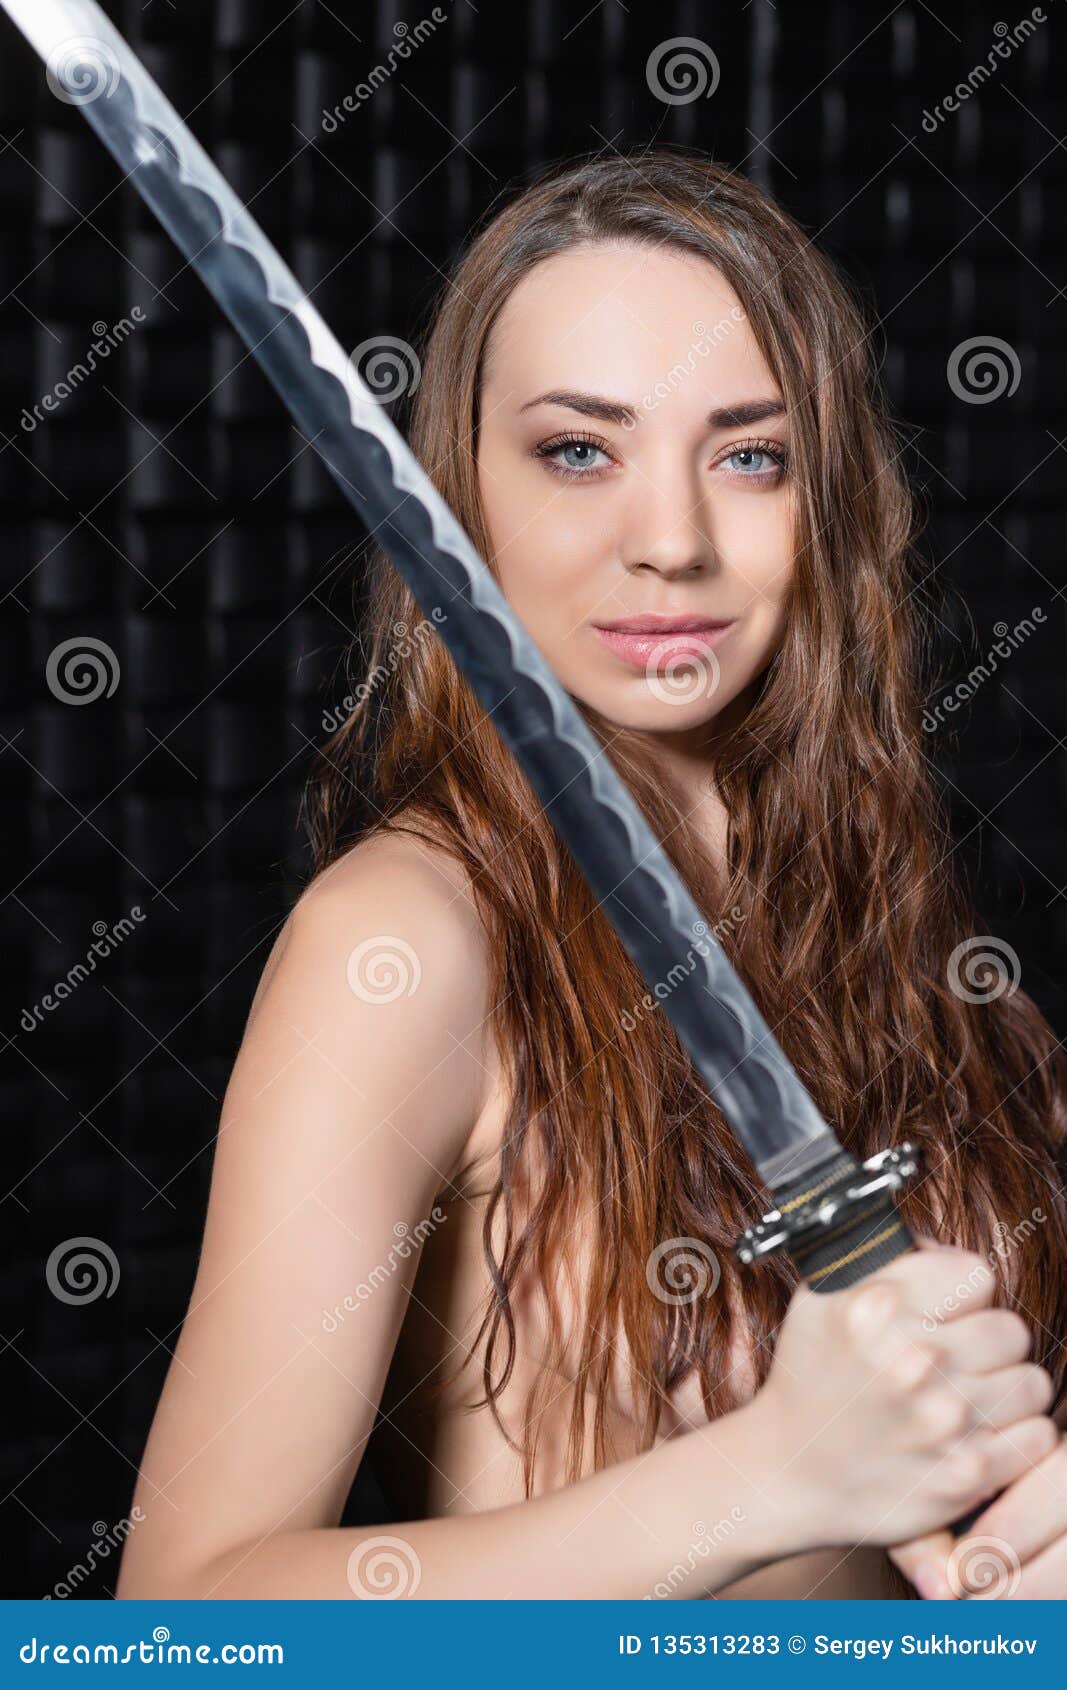 Nude Playful Woman With A Katana In Her Hands Stock Image Image Of Adult Hair 135313283